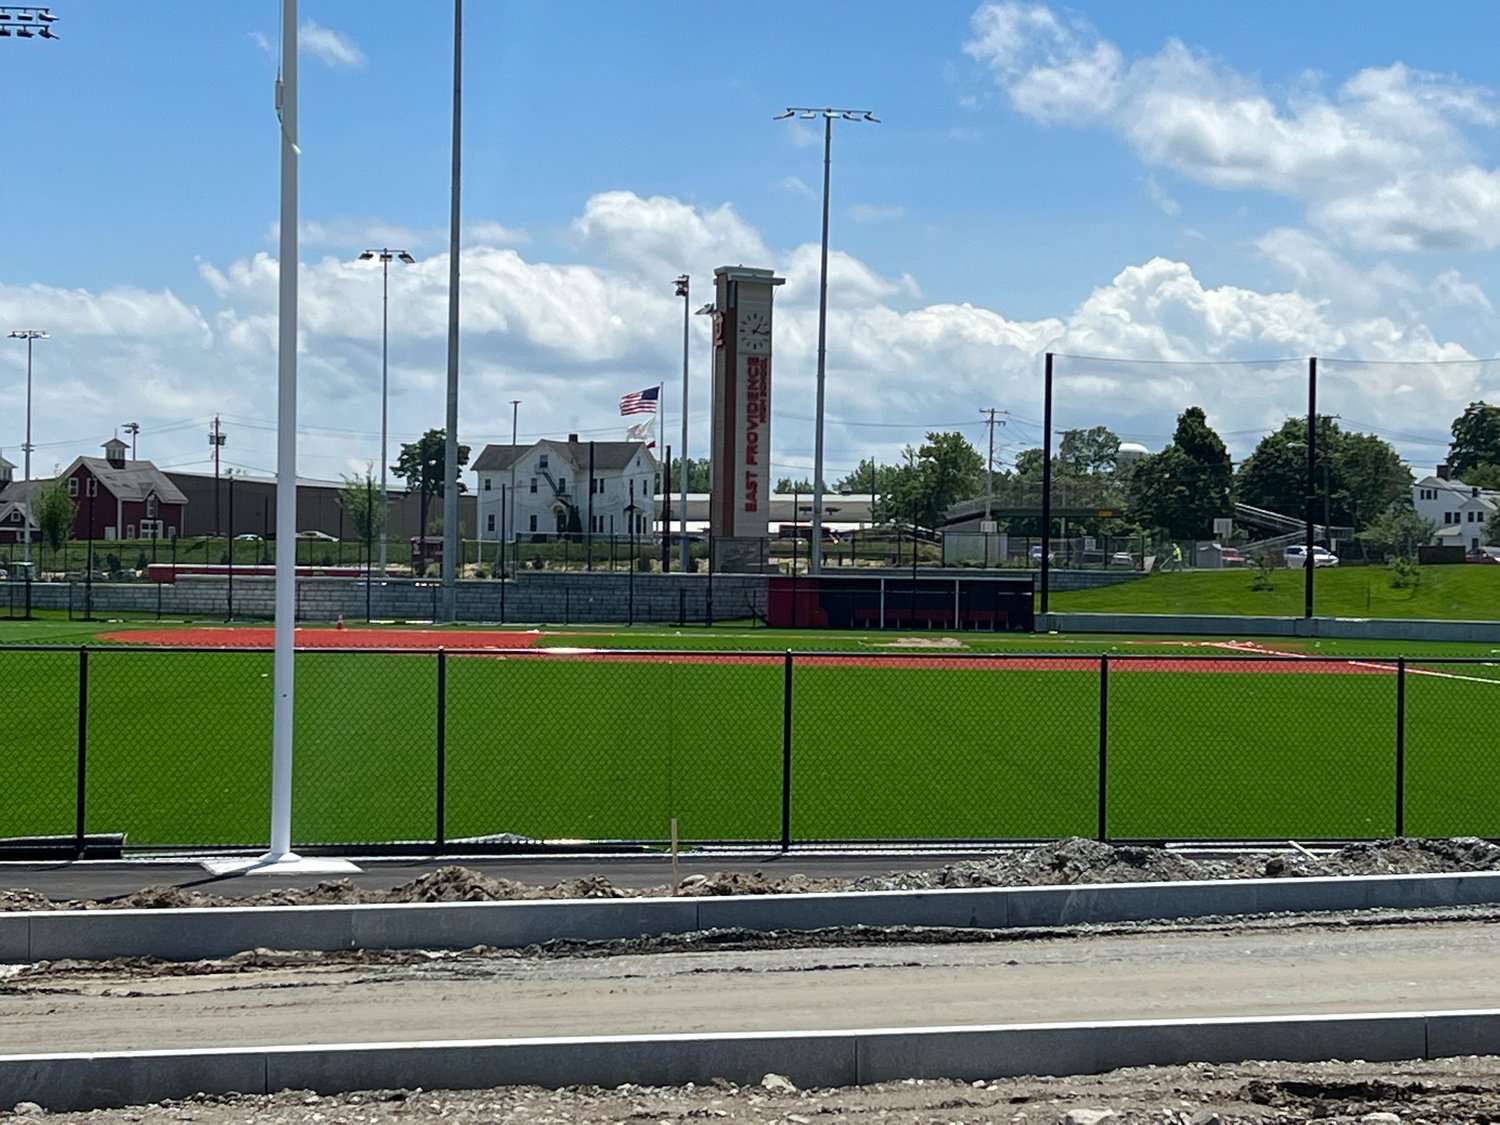 The new EPHS baseball field as it looked the week of June 6.